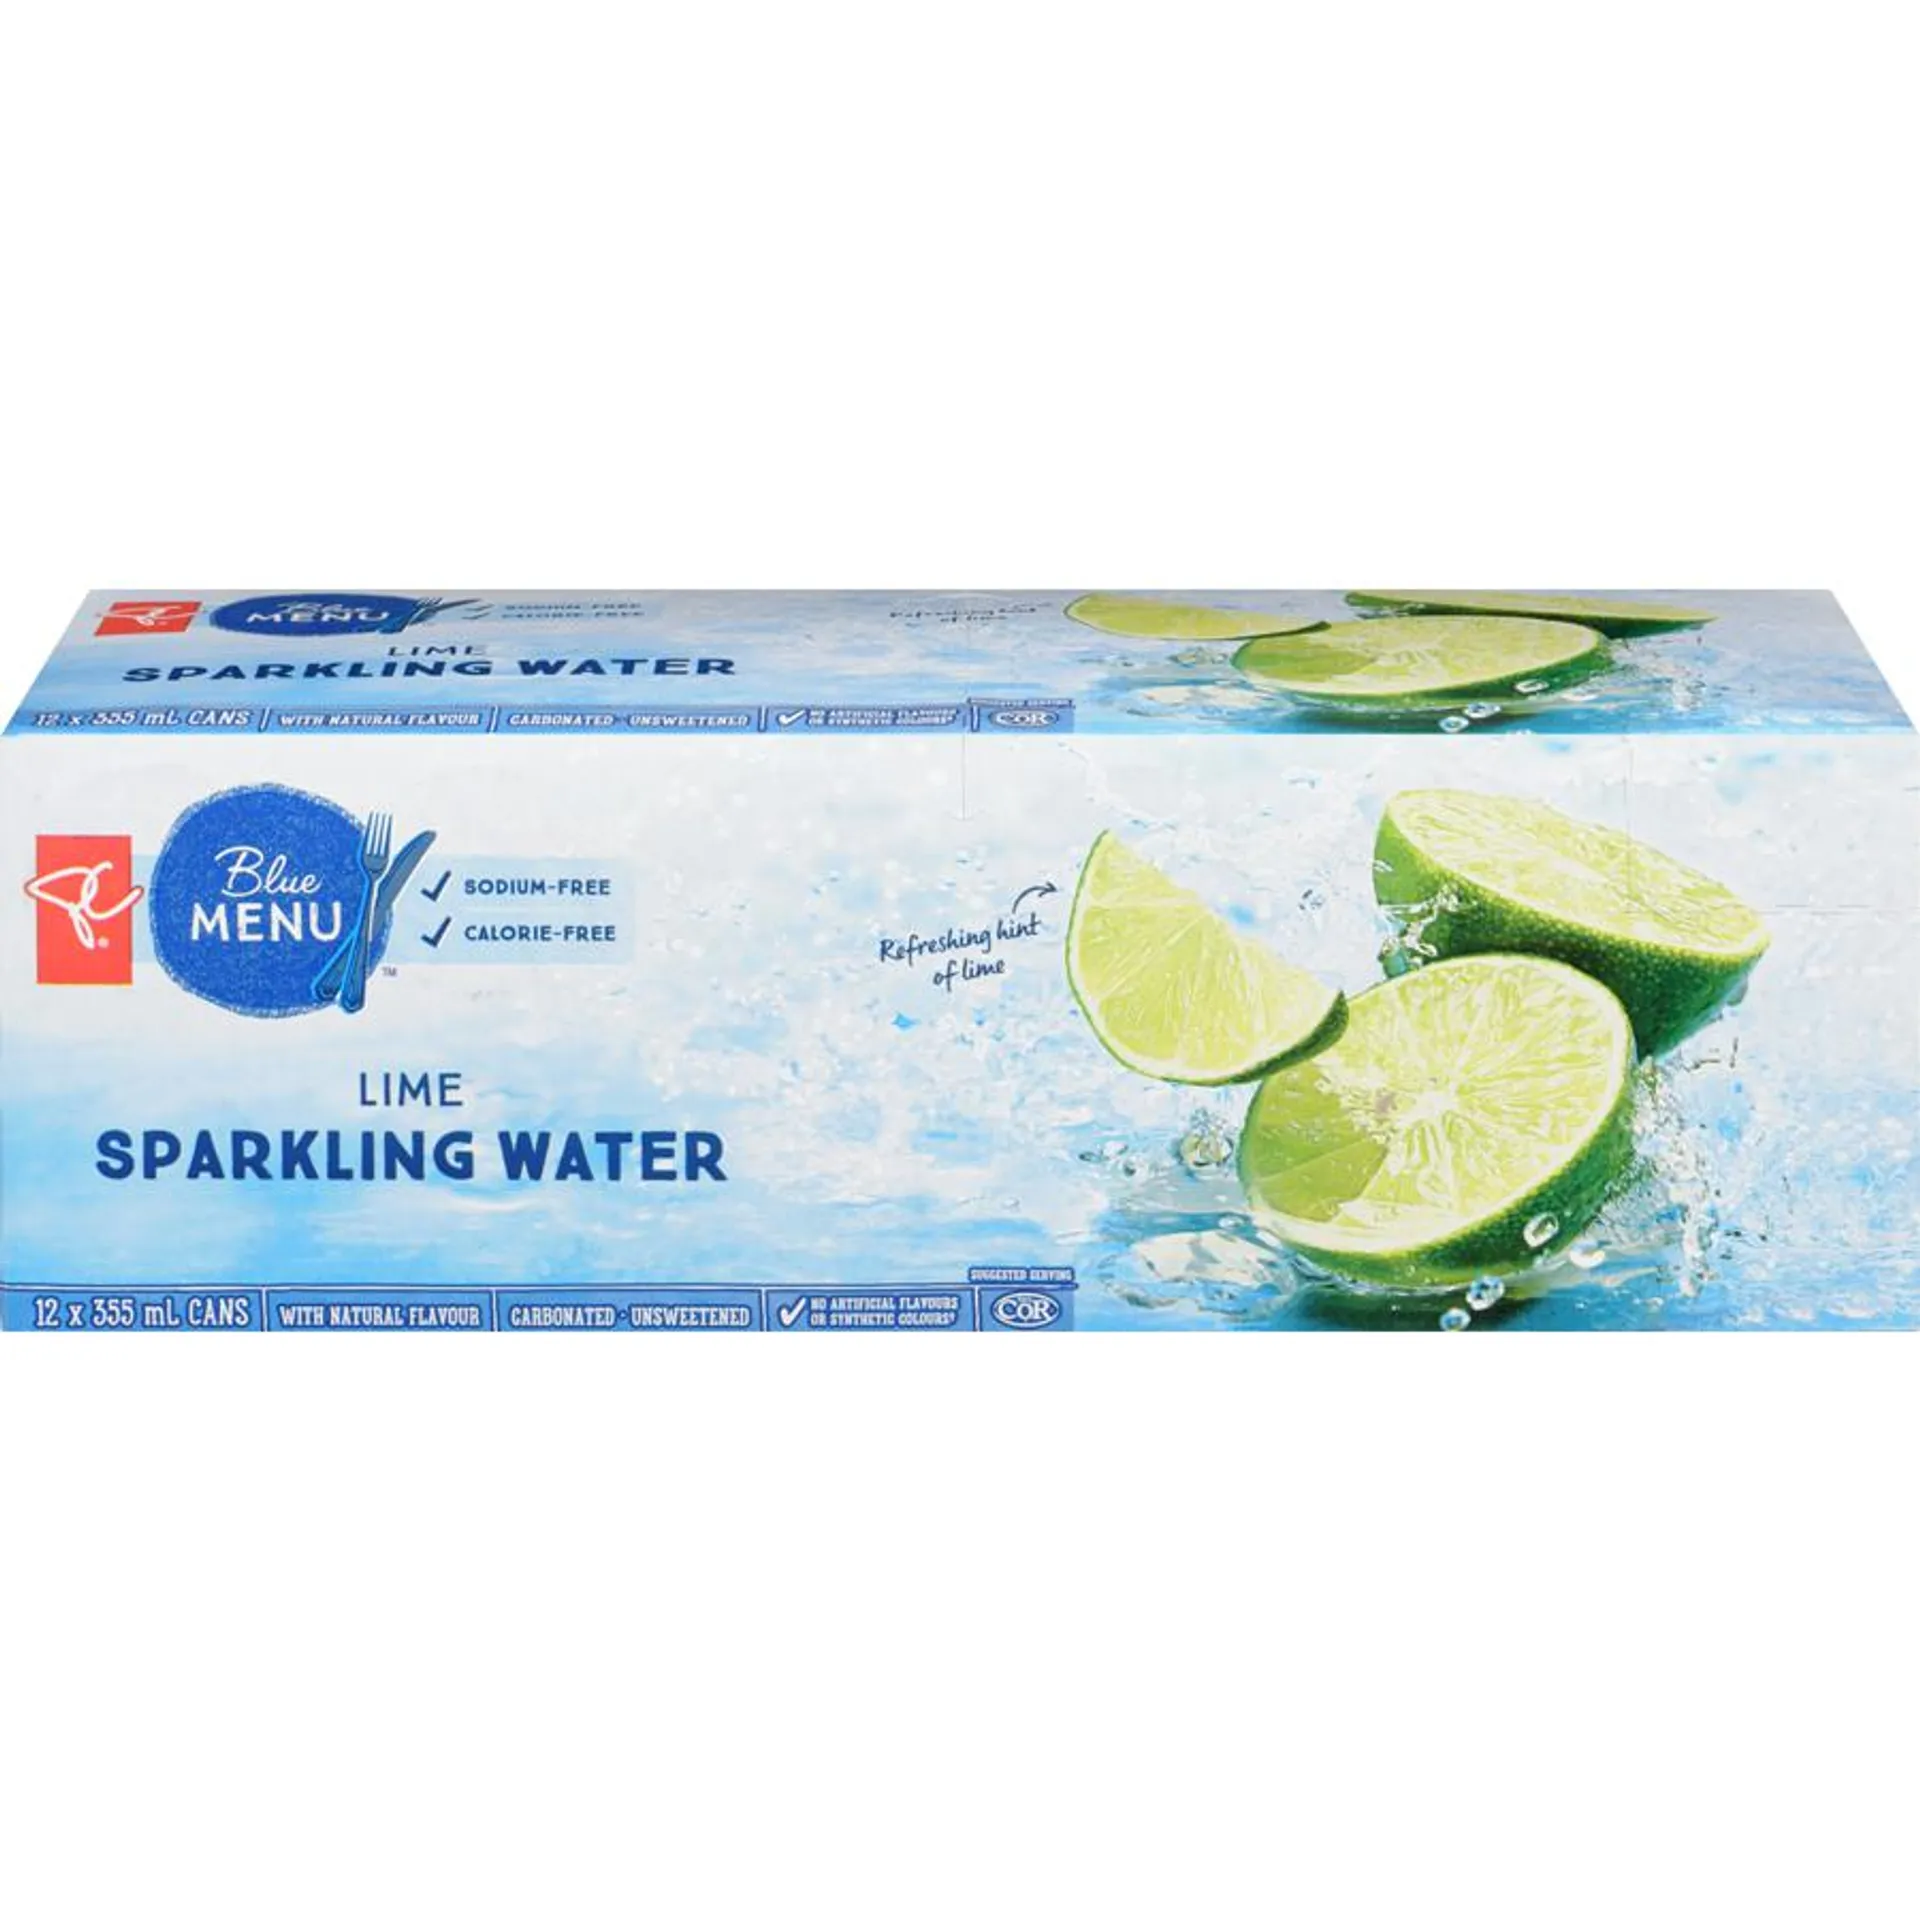 Lime Sparkling Water, 12-Pack